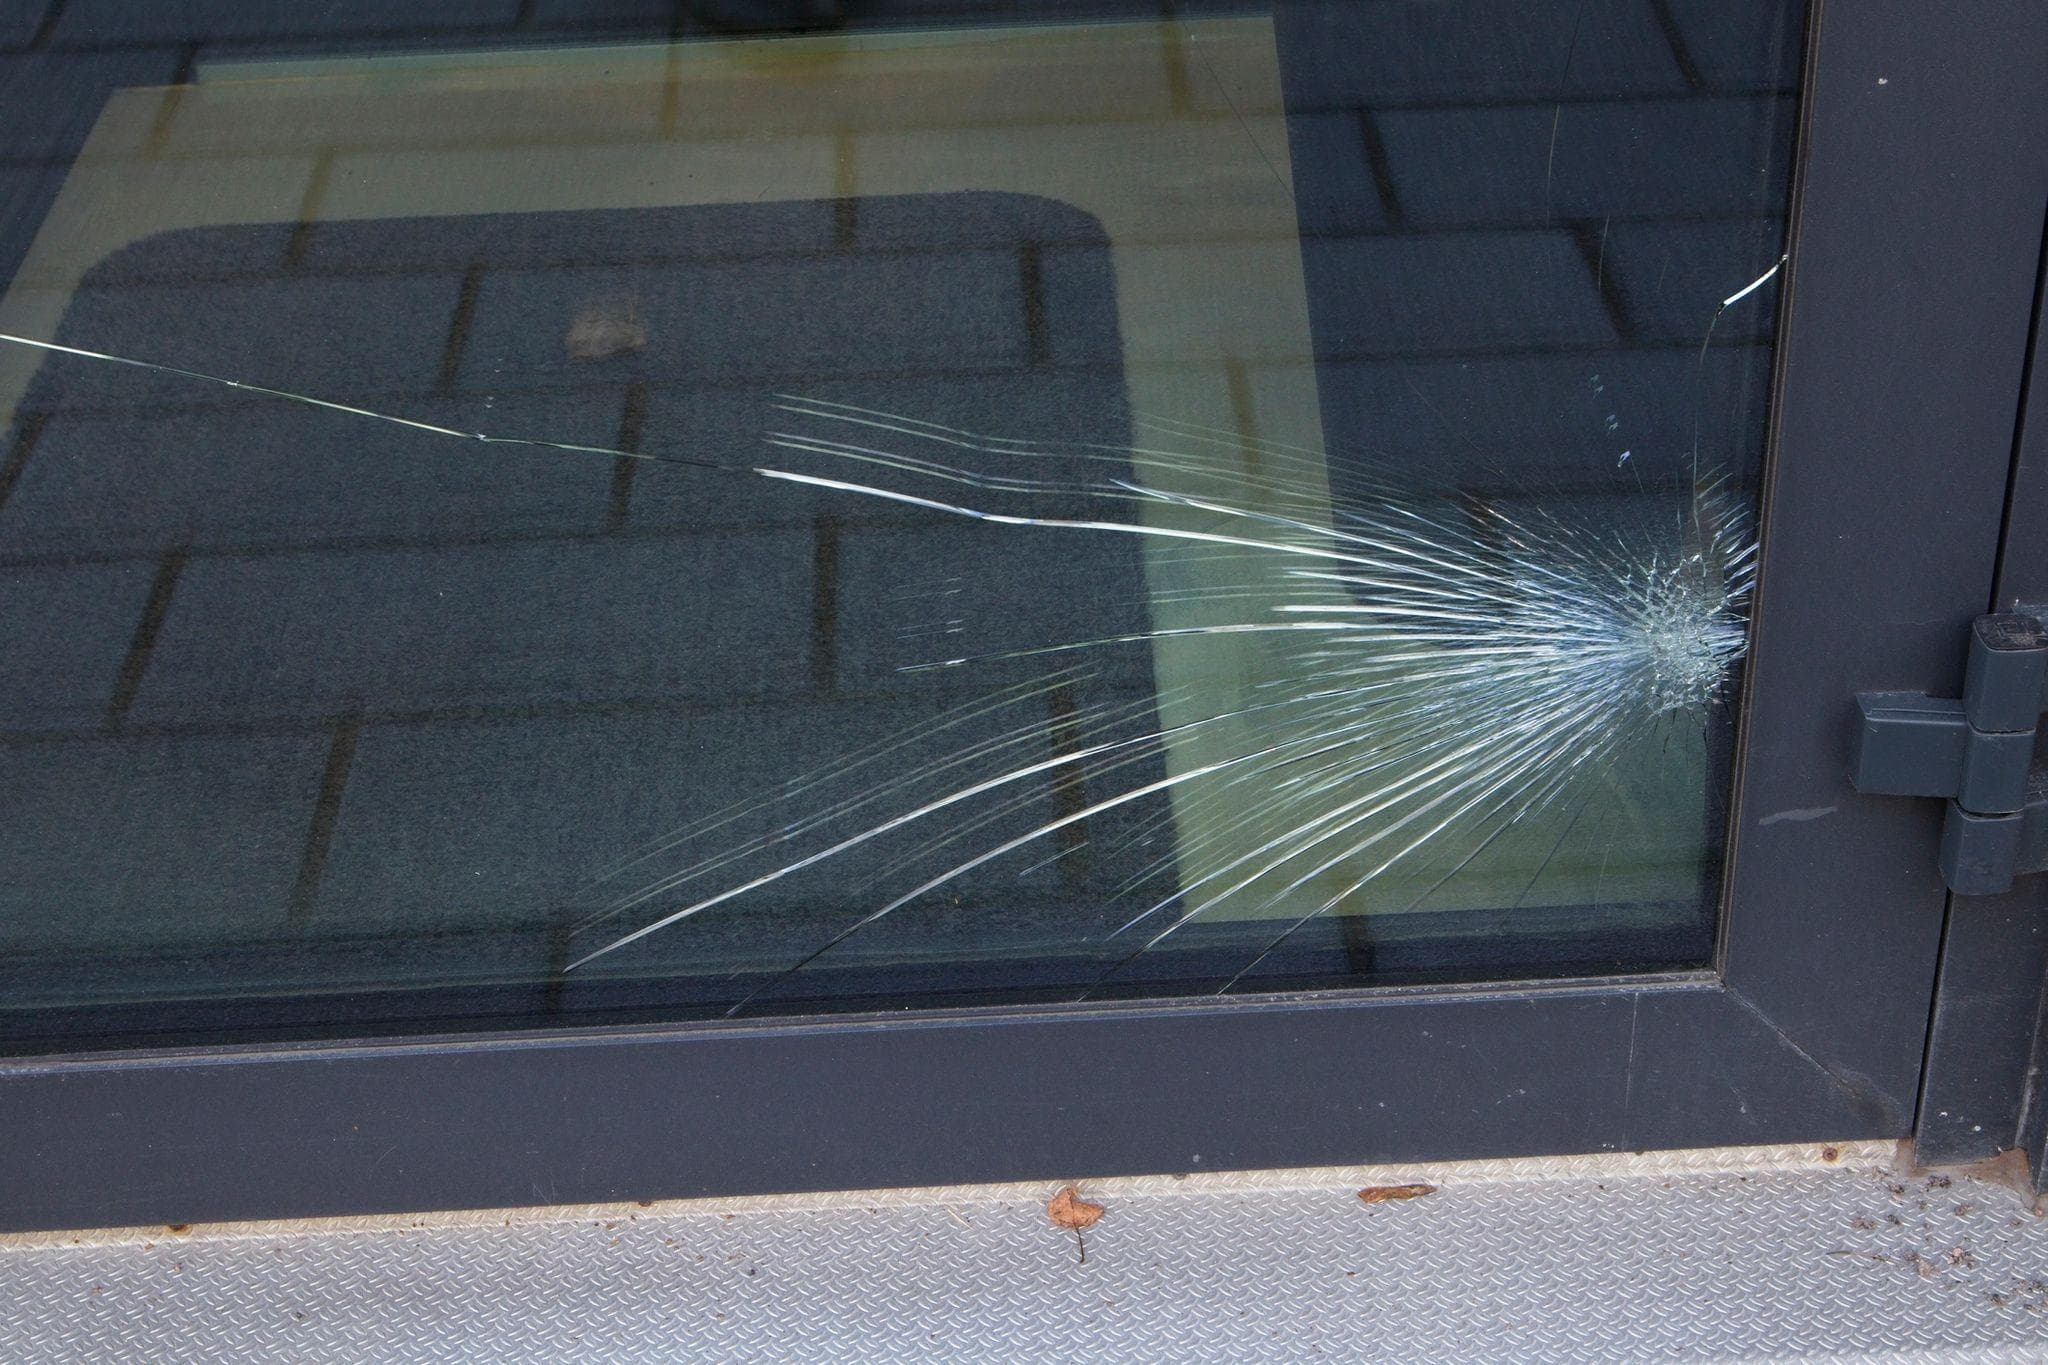 glass entry door cracked from impact